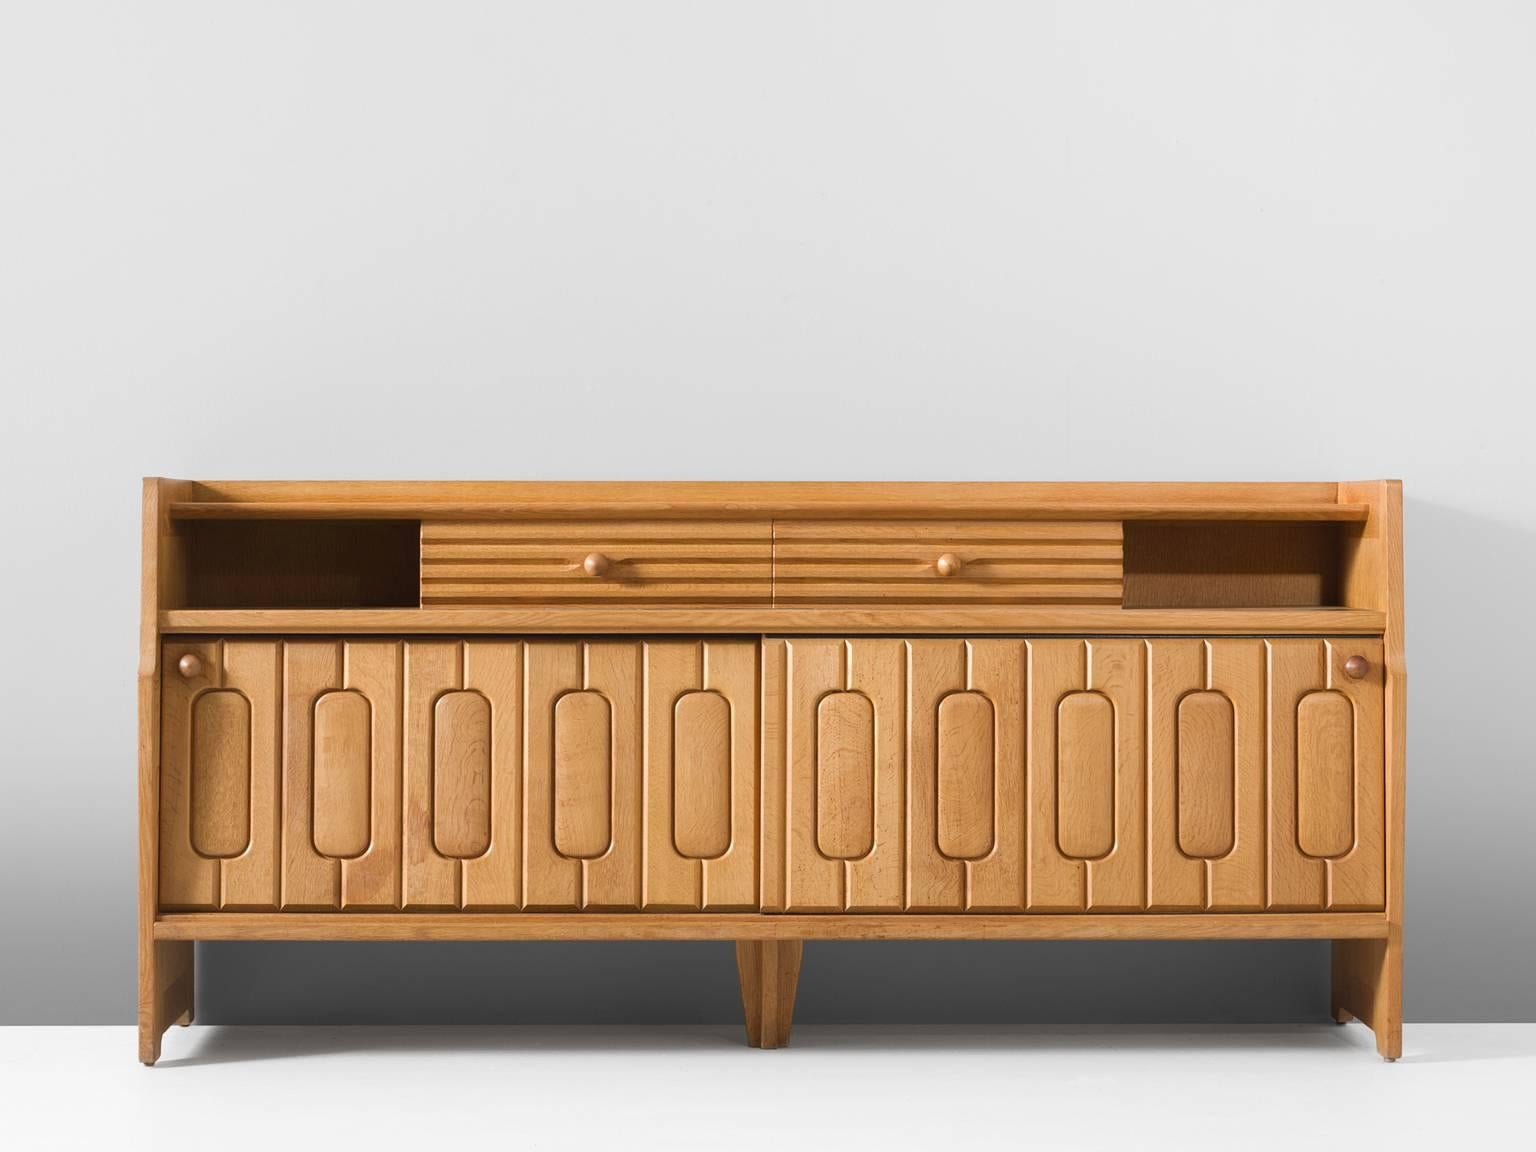 Sideboard, in oak and ceramic, by Guillerme et Chambron, France, 1960s.

Credenza in oak by French designers Guillerme & Chambron. This sideboard is equipped with two sliding-doors and a set of drawers. The front of the sideboard is beautifully